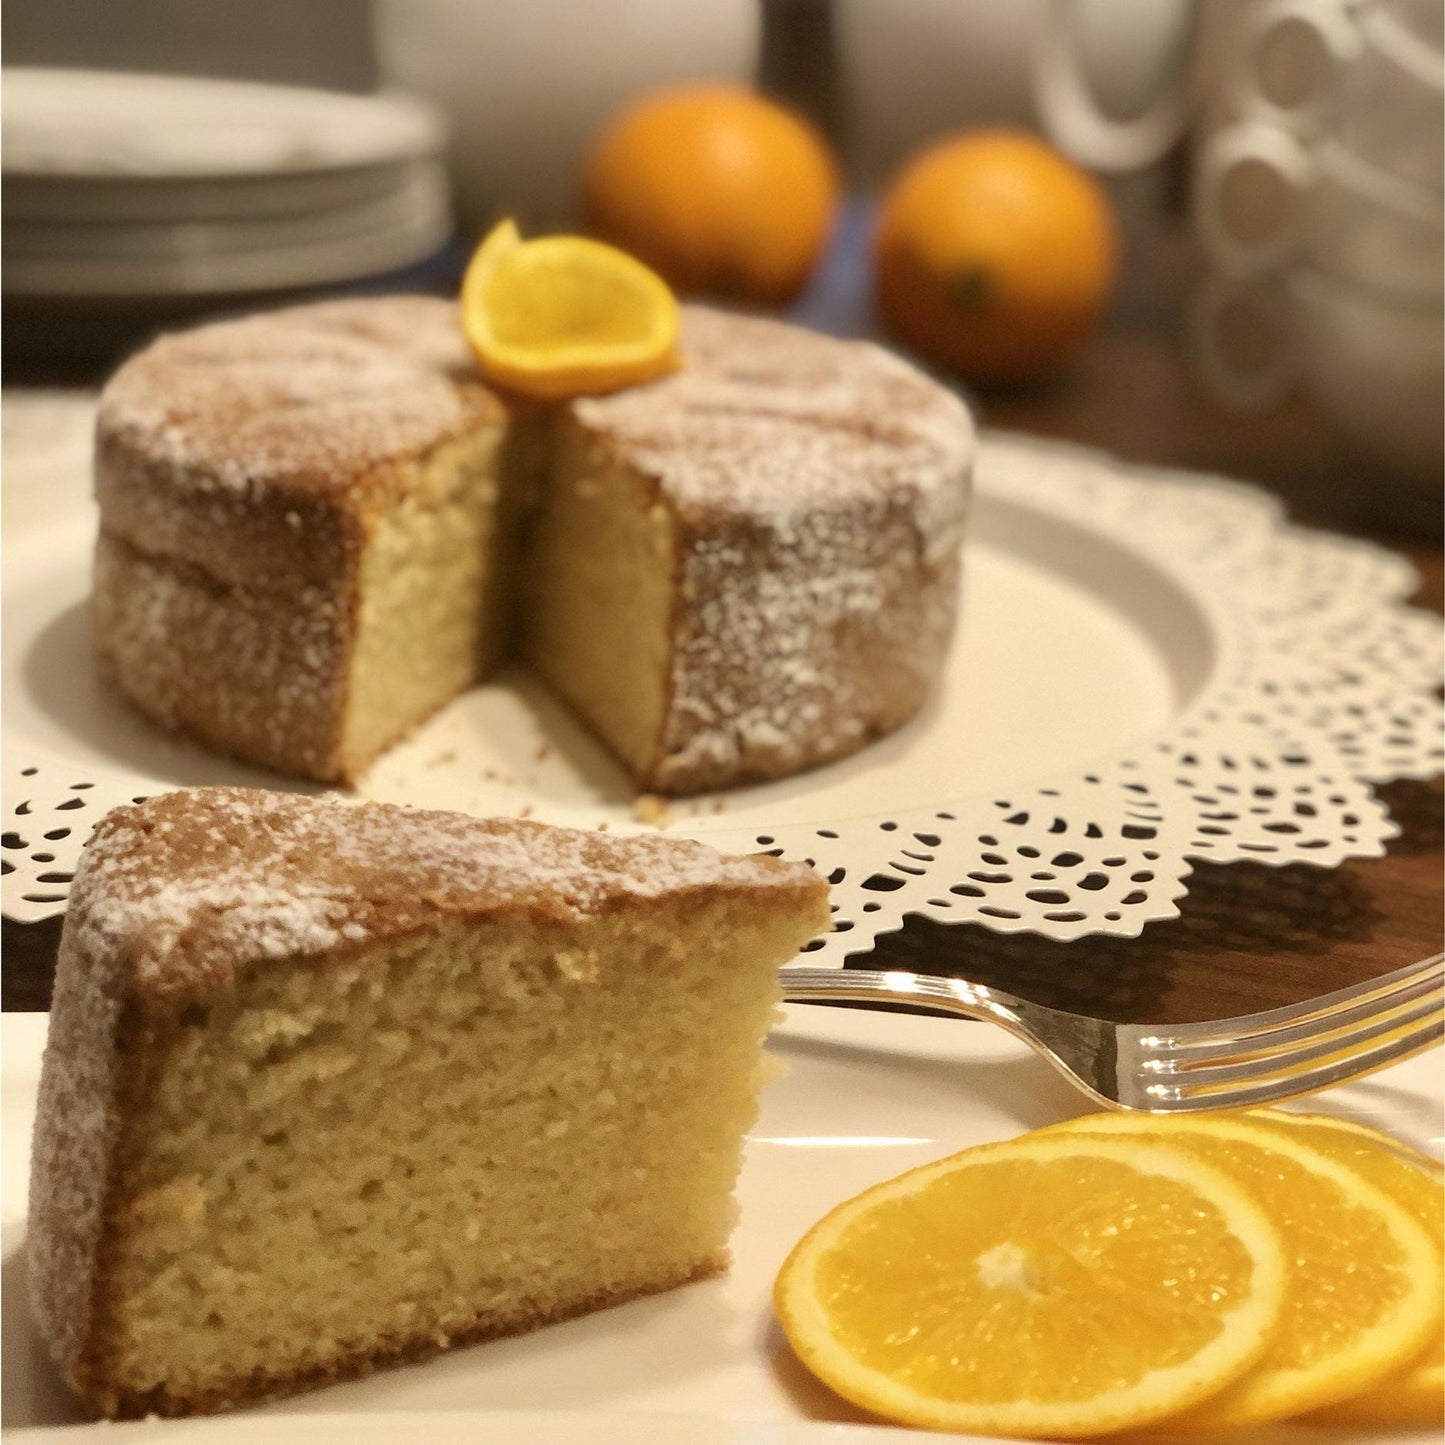 Gluten-free, dairy-free, sugar free Florida Orange Cake made with organic orange juice and peels, topped with sugar-free caramel syrup and toasted almonds, perfect for a refreshing treat. Full Life Gourmet Bakery